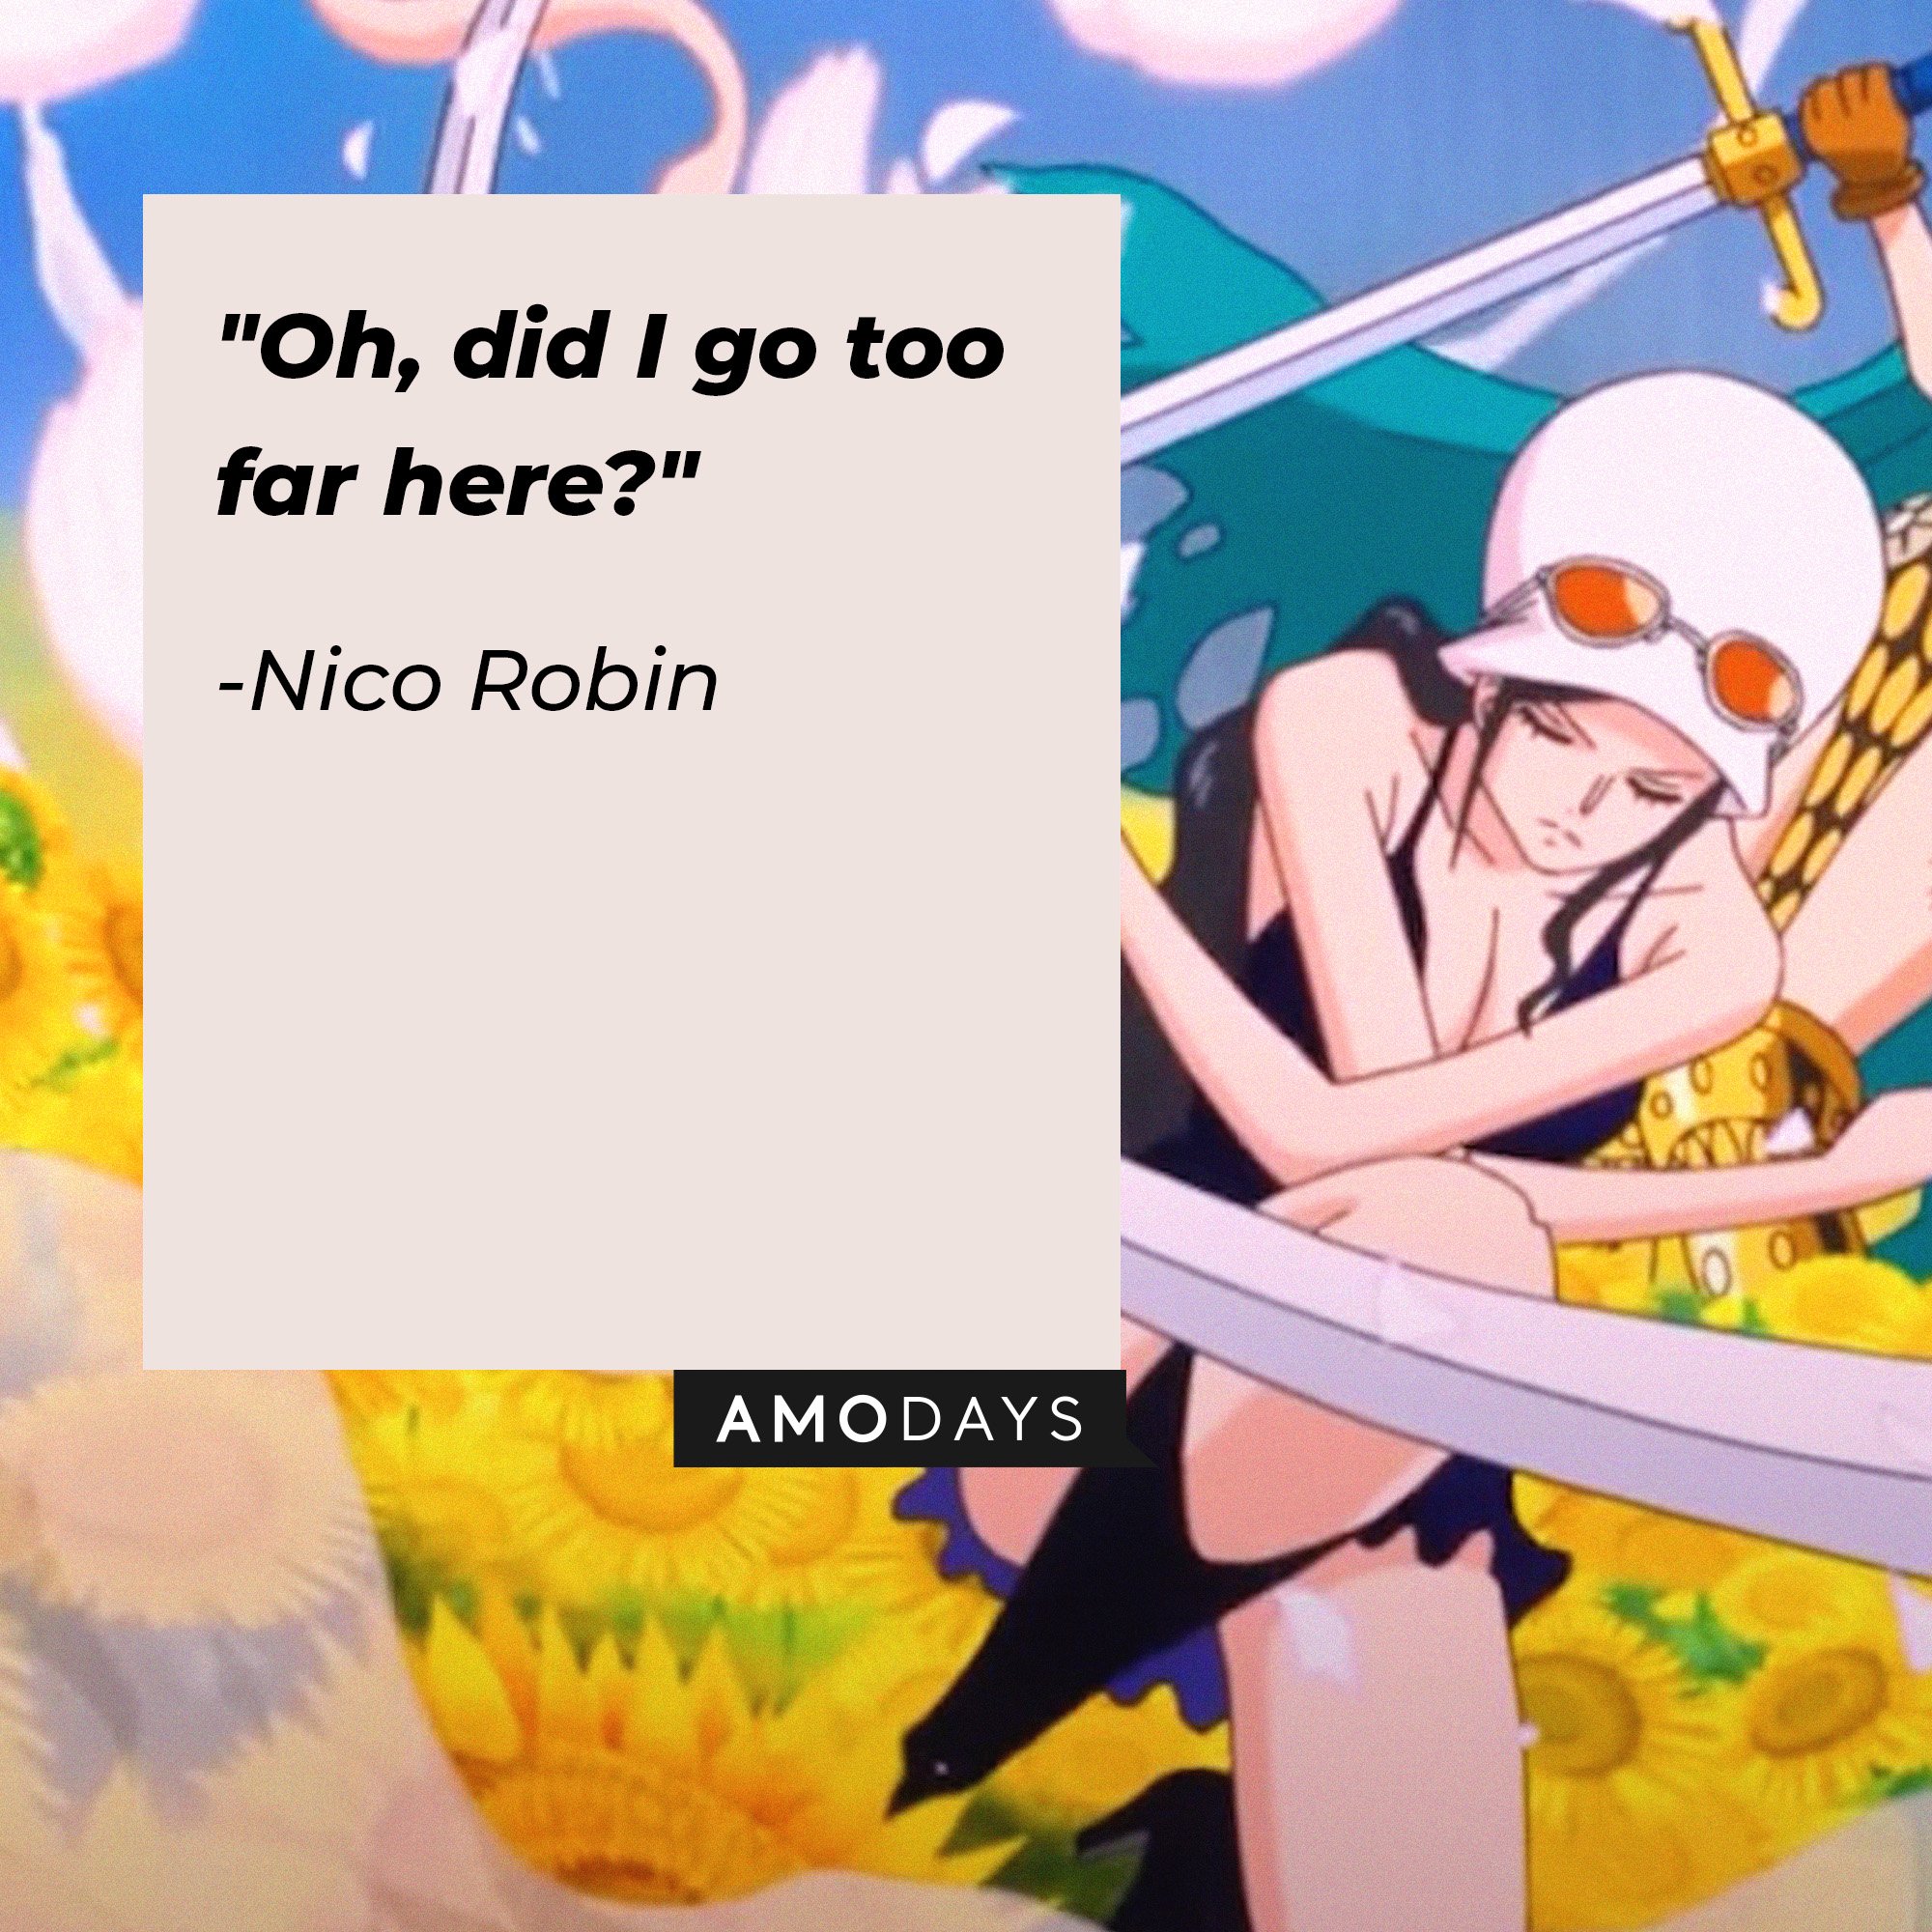 Nico Robin’s quote: "Oh, did I go too far here?" | Image: AmoDays